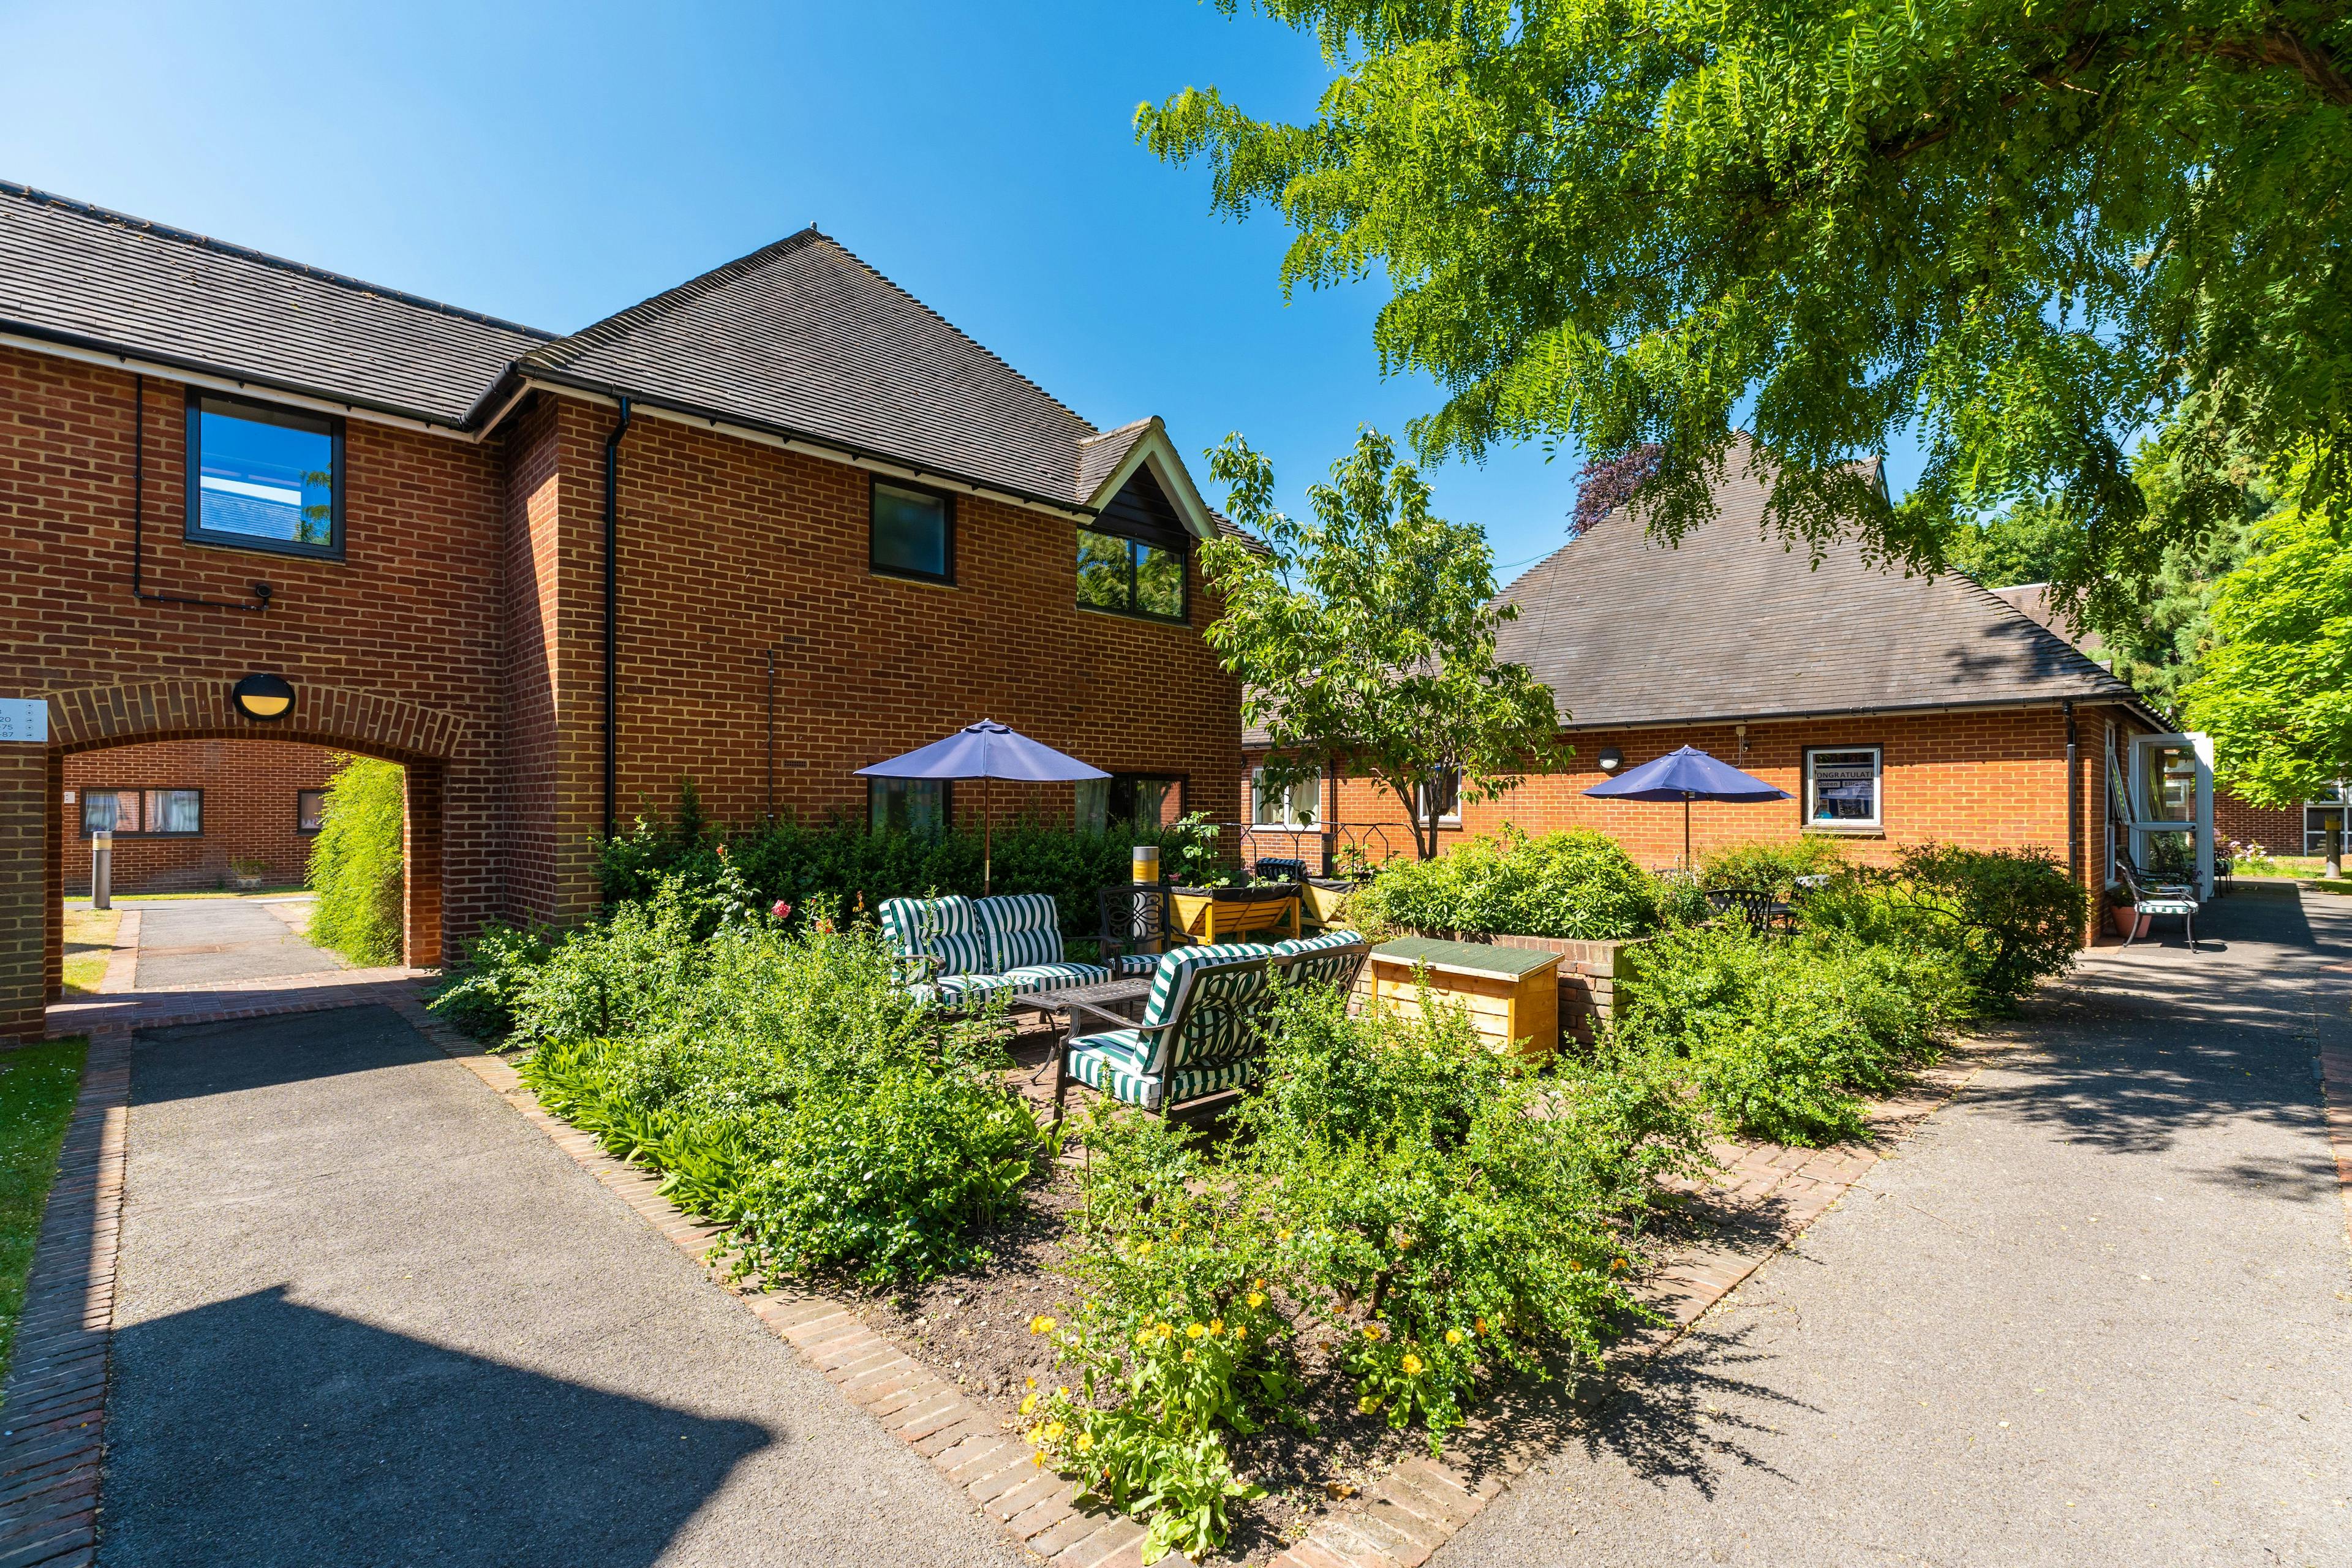 The Whitgift Foundation - Whitgift House care home 7